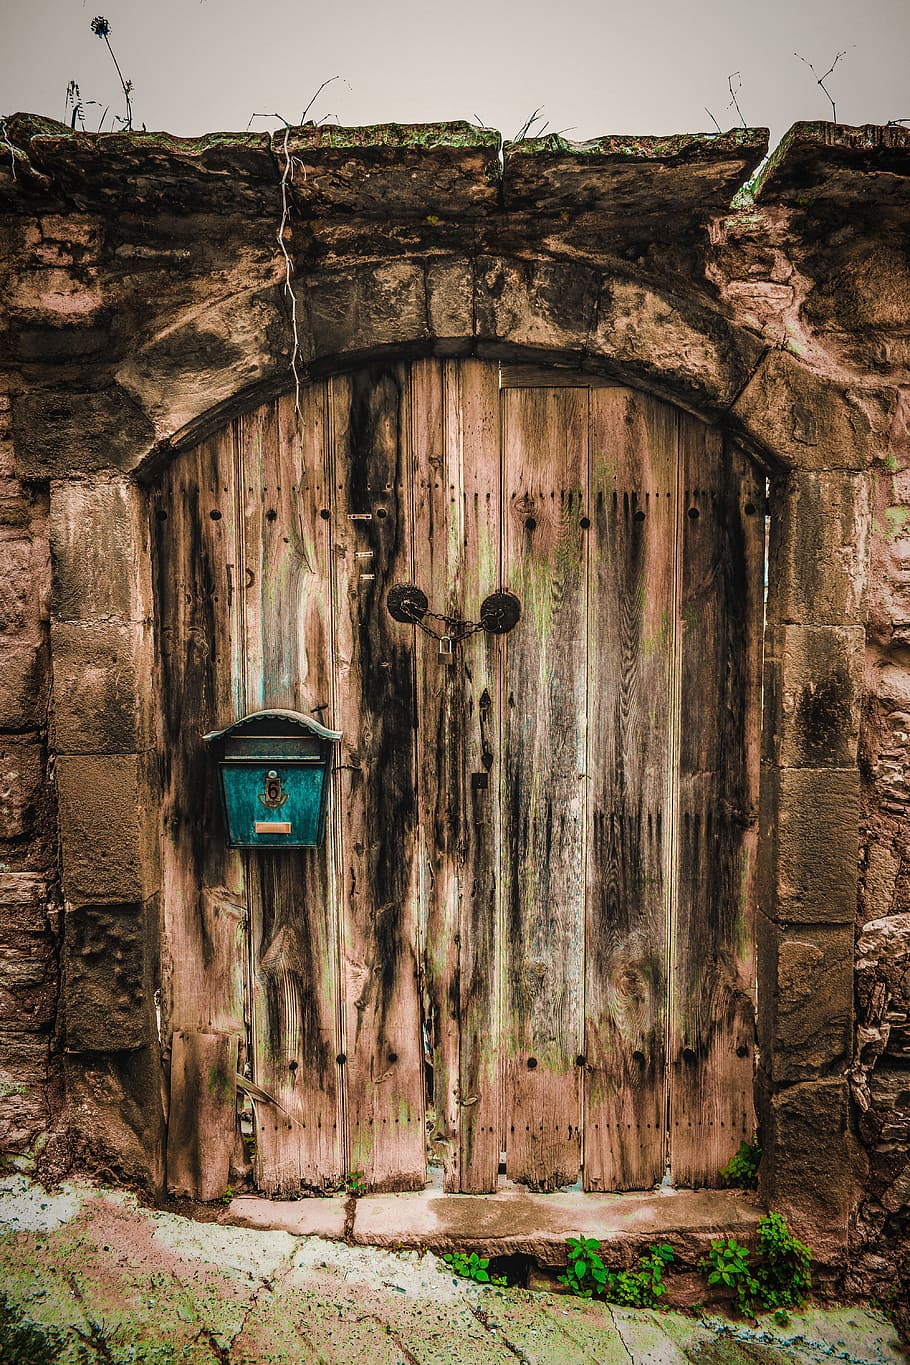 door, old, architecture, gate, wooden, aged, weathered, decay, entrance, traditional